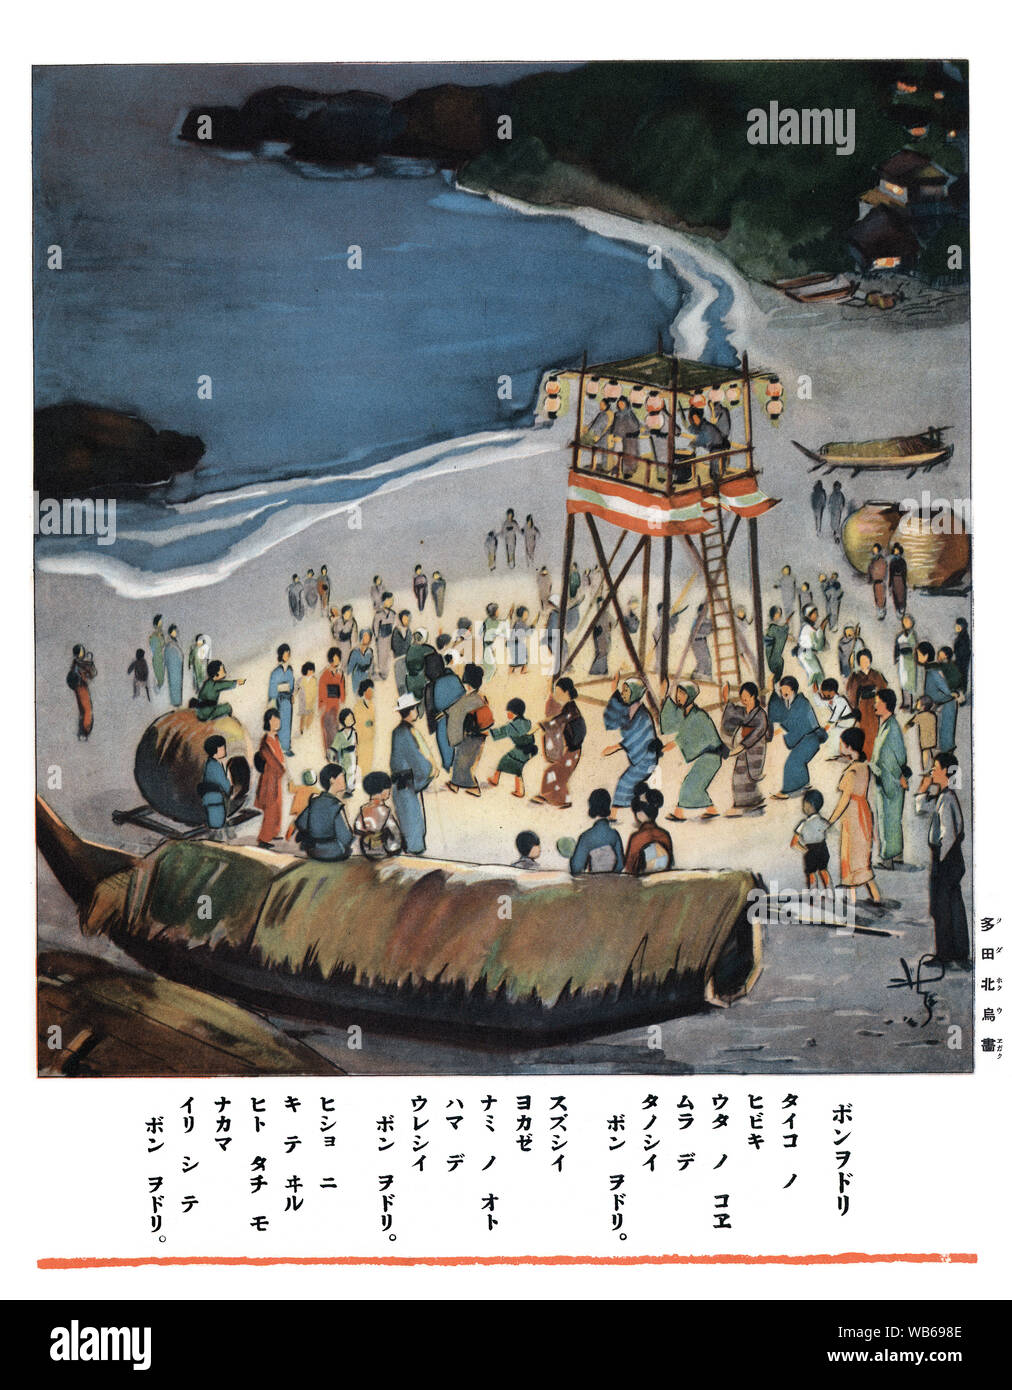 [ 1930s Japan - Illustration of Dancing at the Japanese Bon Festival ] —   A print with verse for elementary school children showing a community performing bon-odori, dances for the bon festival.  20th century vintage book illustration. Stock Photo